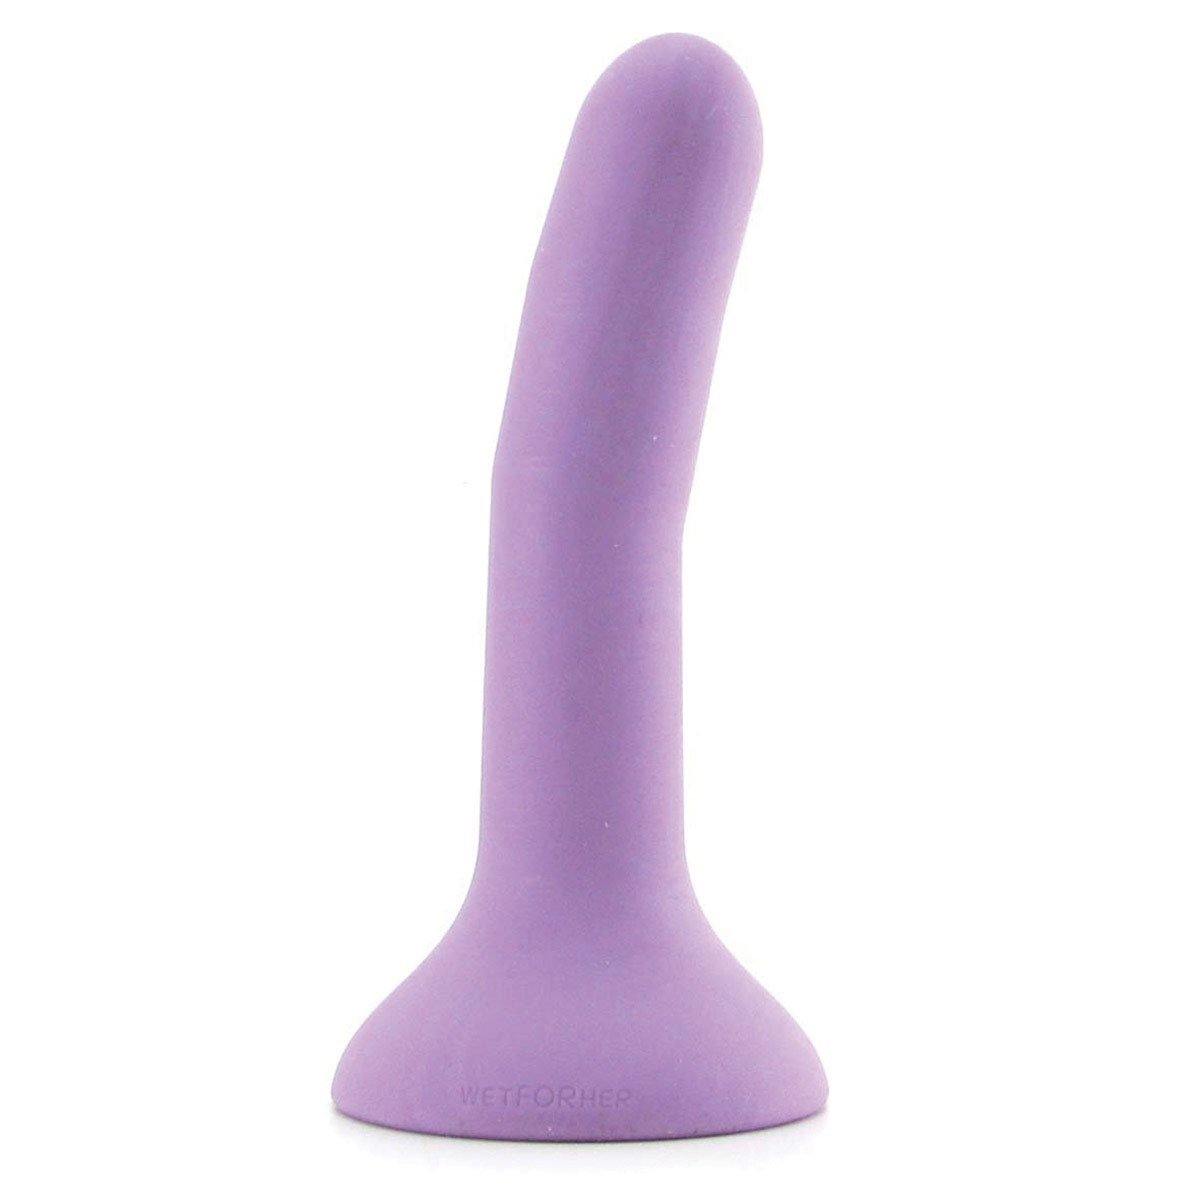 Wet for Her Five Jules - Small - Violet - Buy At Luxury Toy X - Free 3-Day Shipping